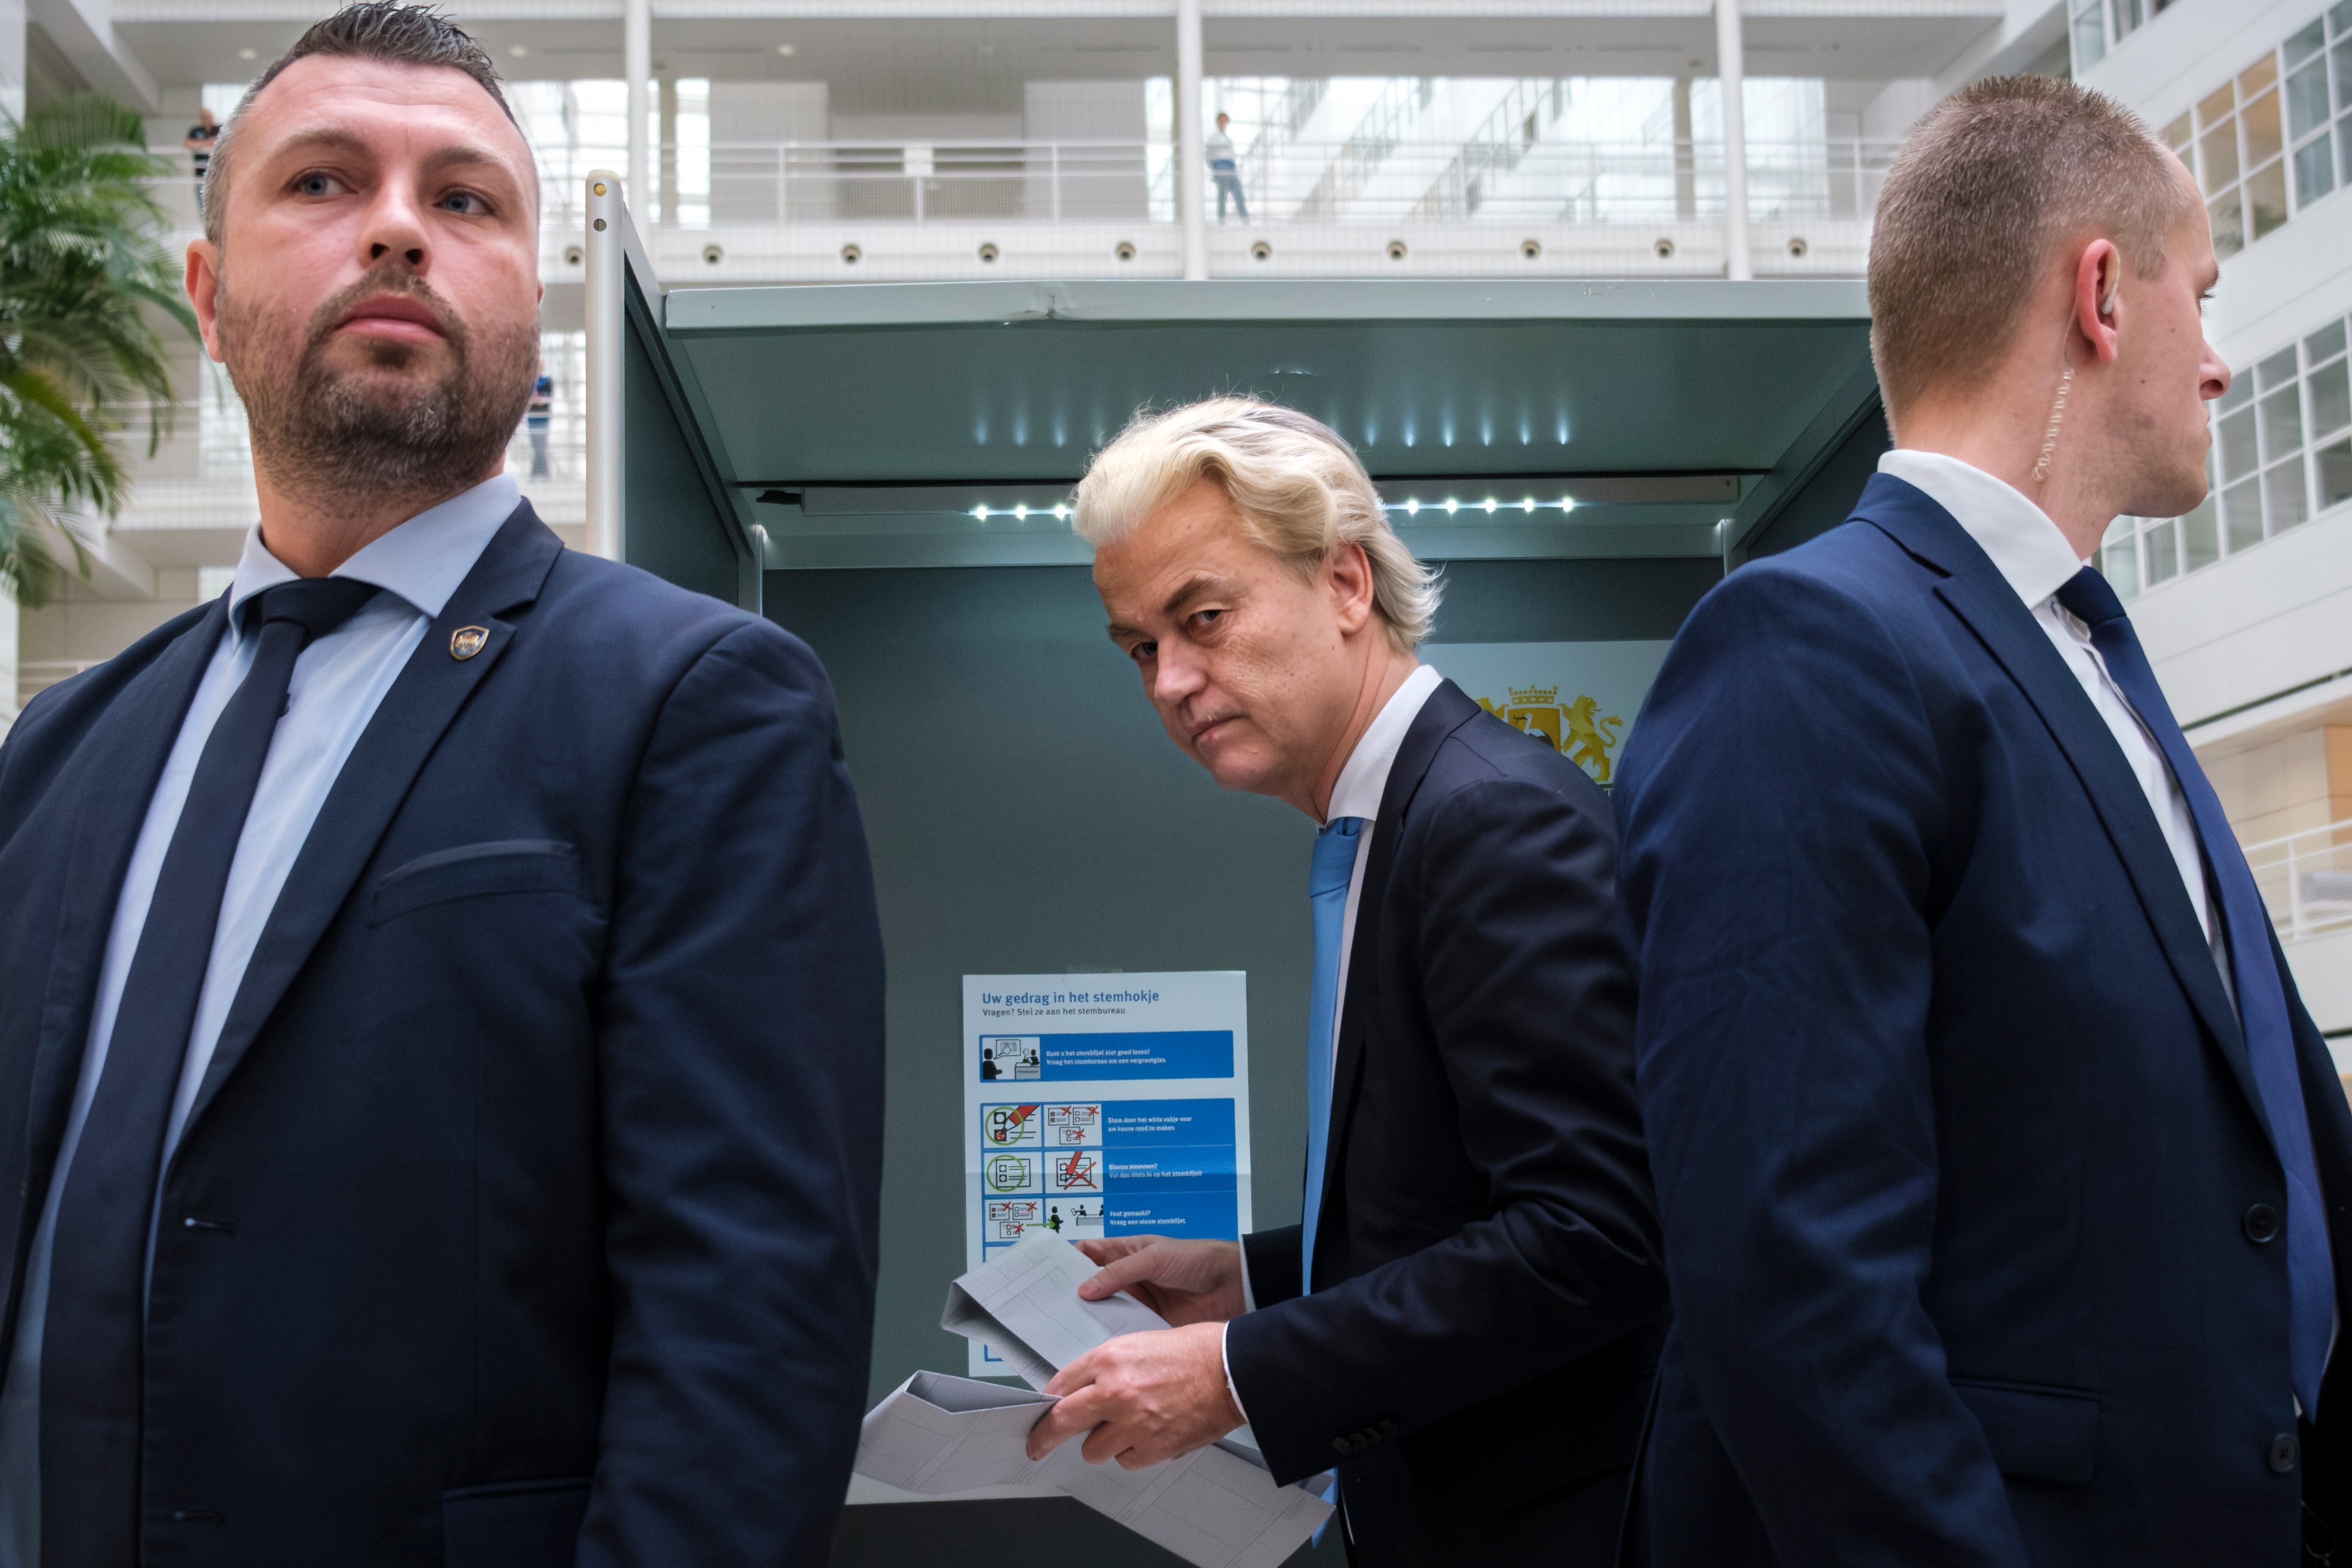 Geert Wilders, leader of the Party for Freedom, known as PVV, casts his ballot in The Hague